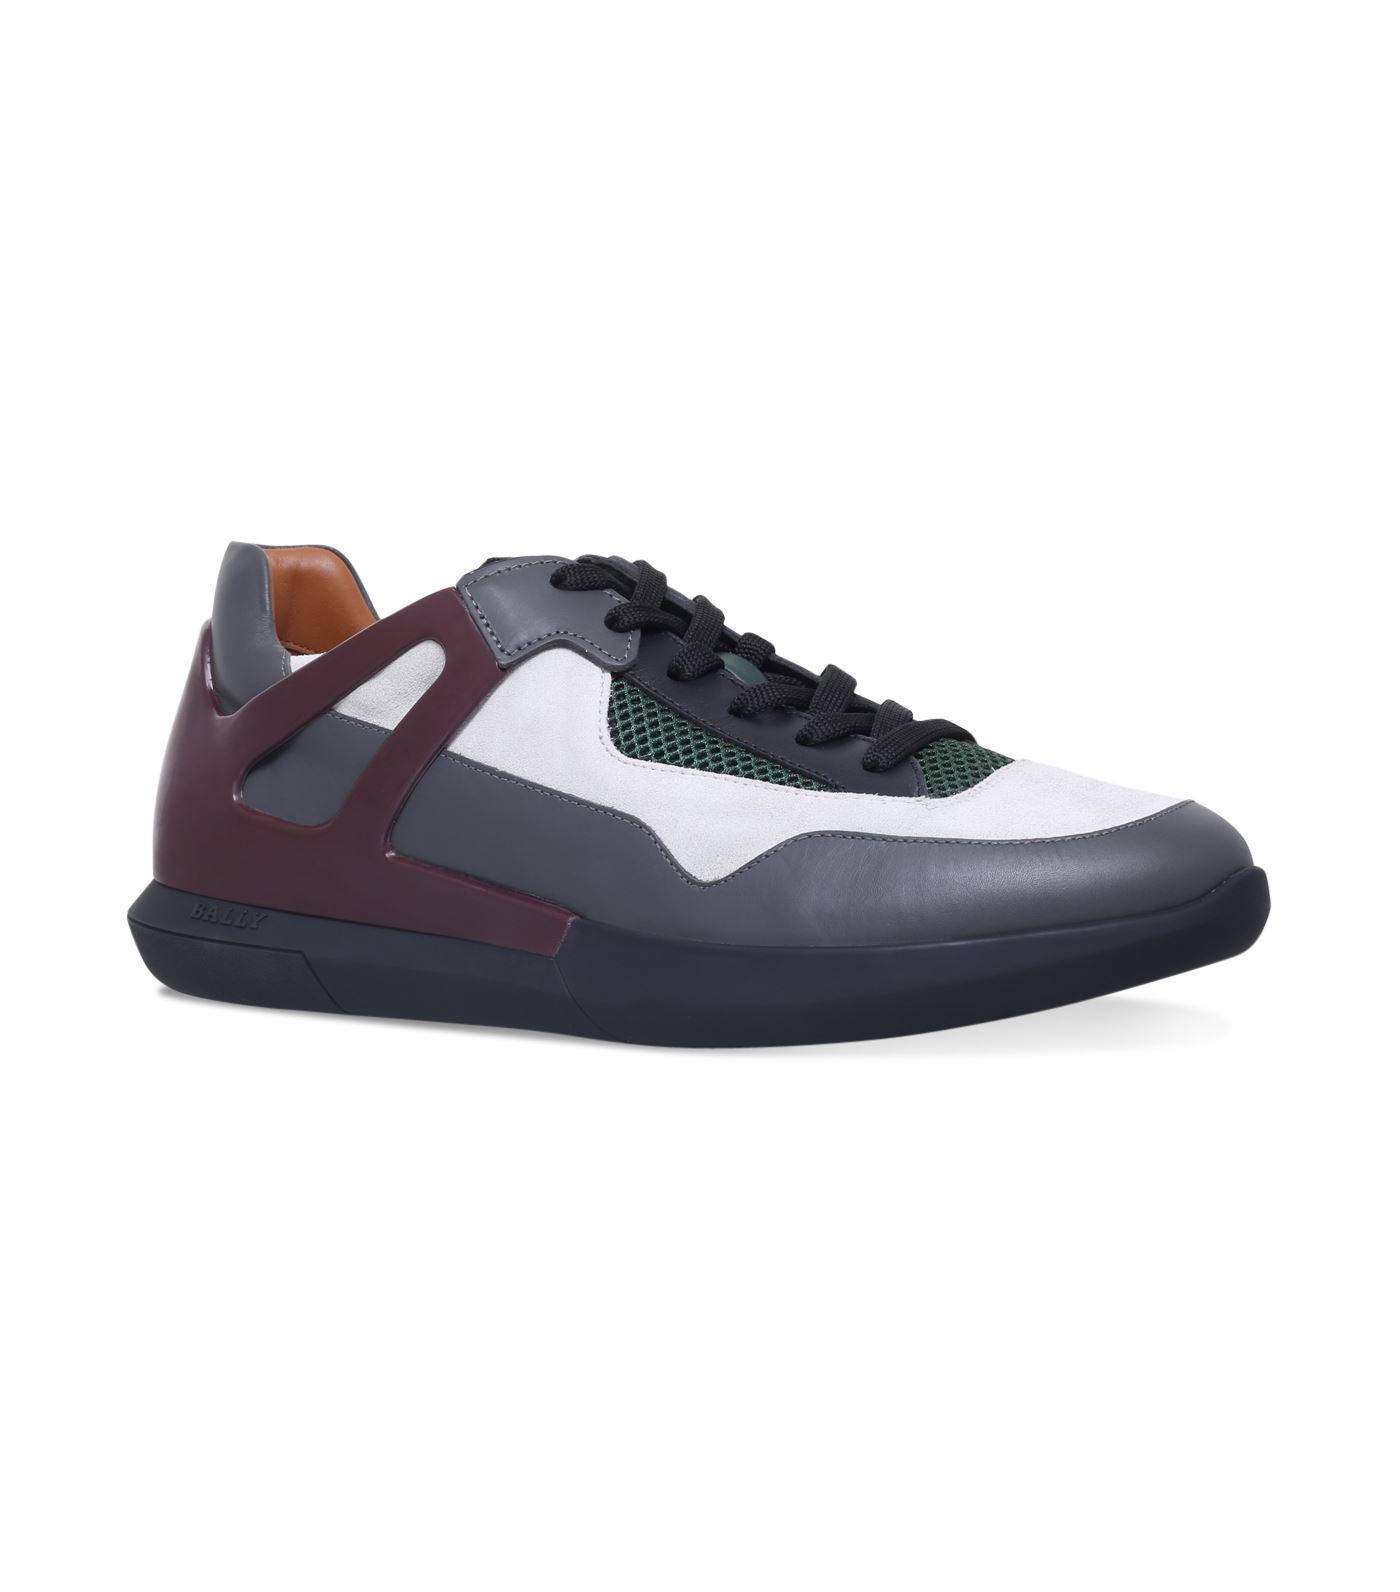 Bally Avion Leather Sneakers in Grey (Gray) for Men - Lyst